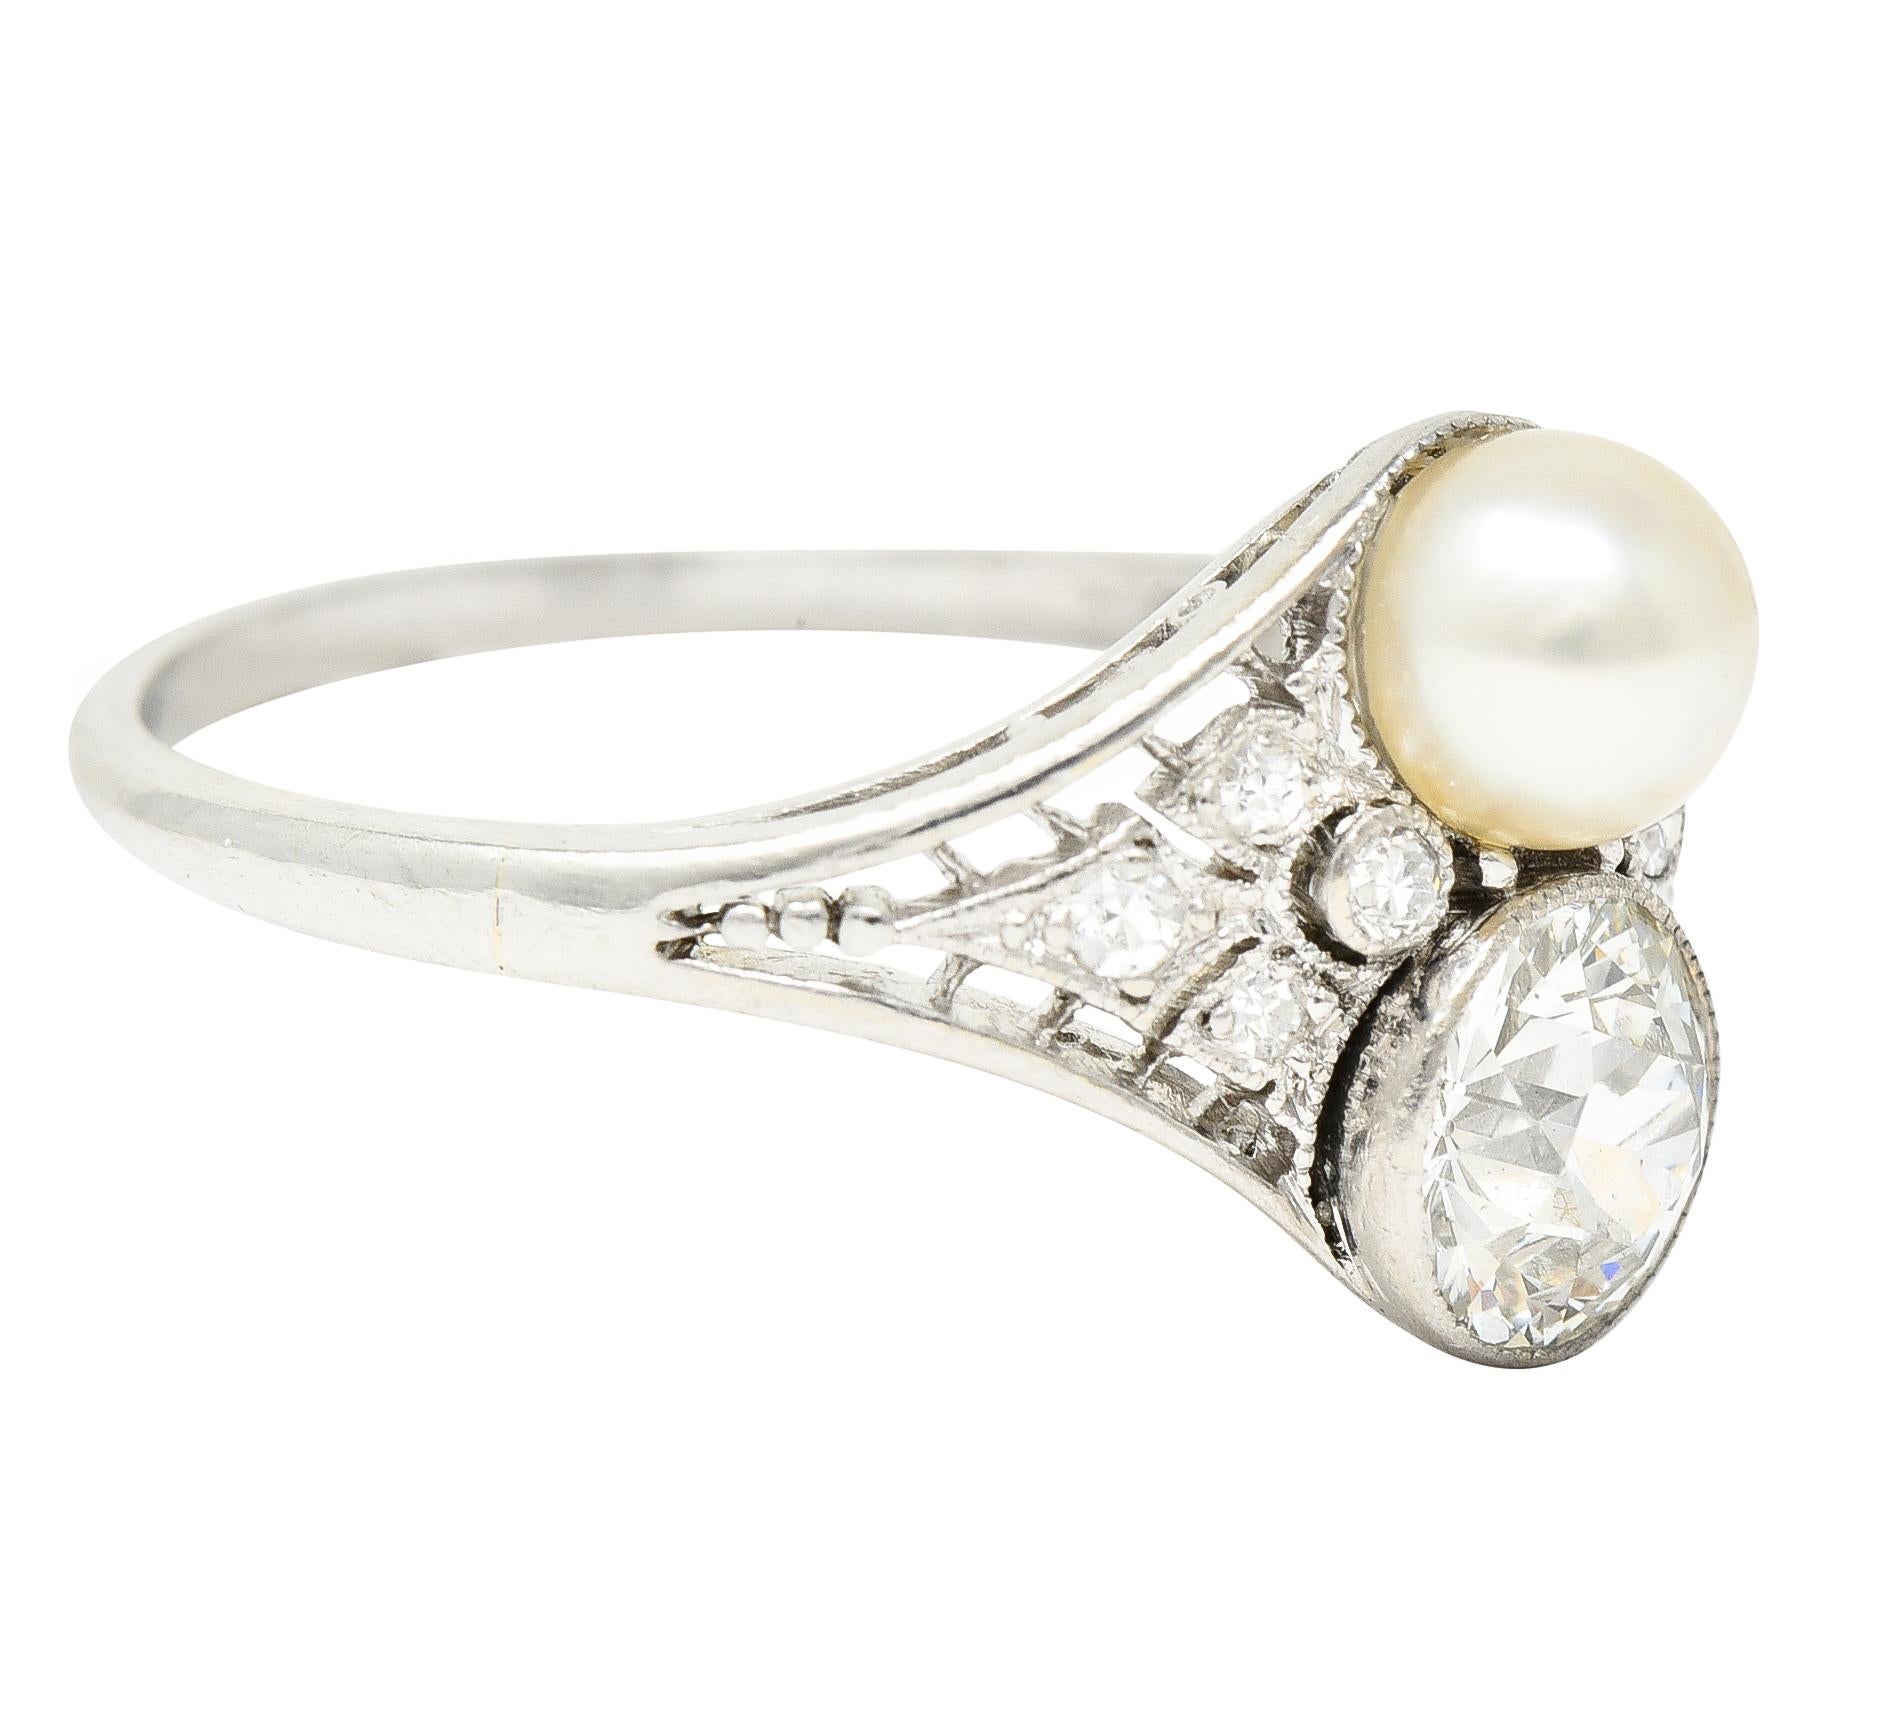 Centering an old European cut diamond weighing approximately 0.72 carat total H color with VS1 clarity. Bezel set North to South with a 5.0 mm round natural pearl - cream with moderate iridescence. Juxtaposed to convey a 'toi-et-moi' motif - French